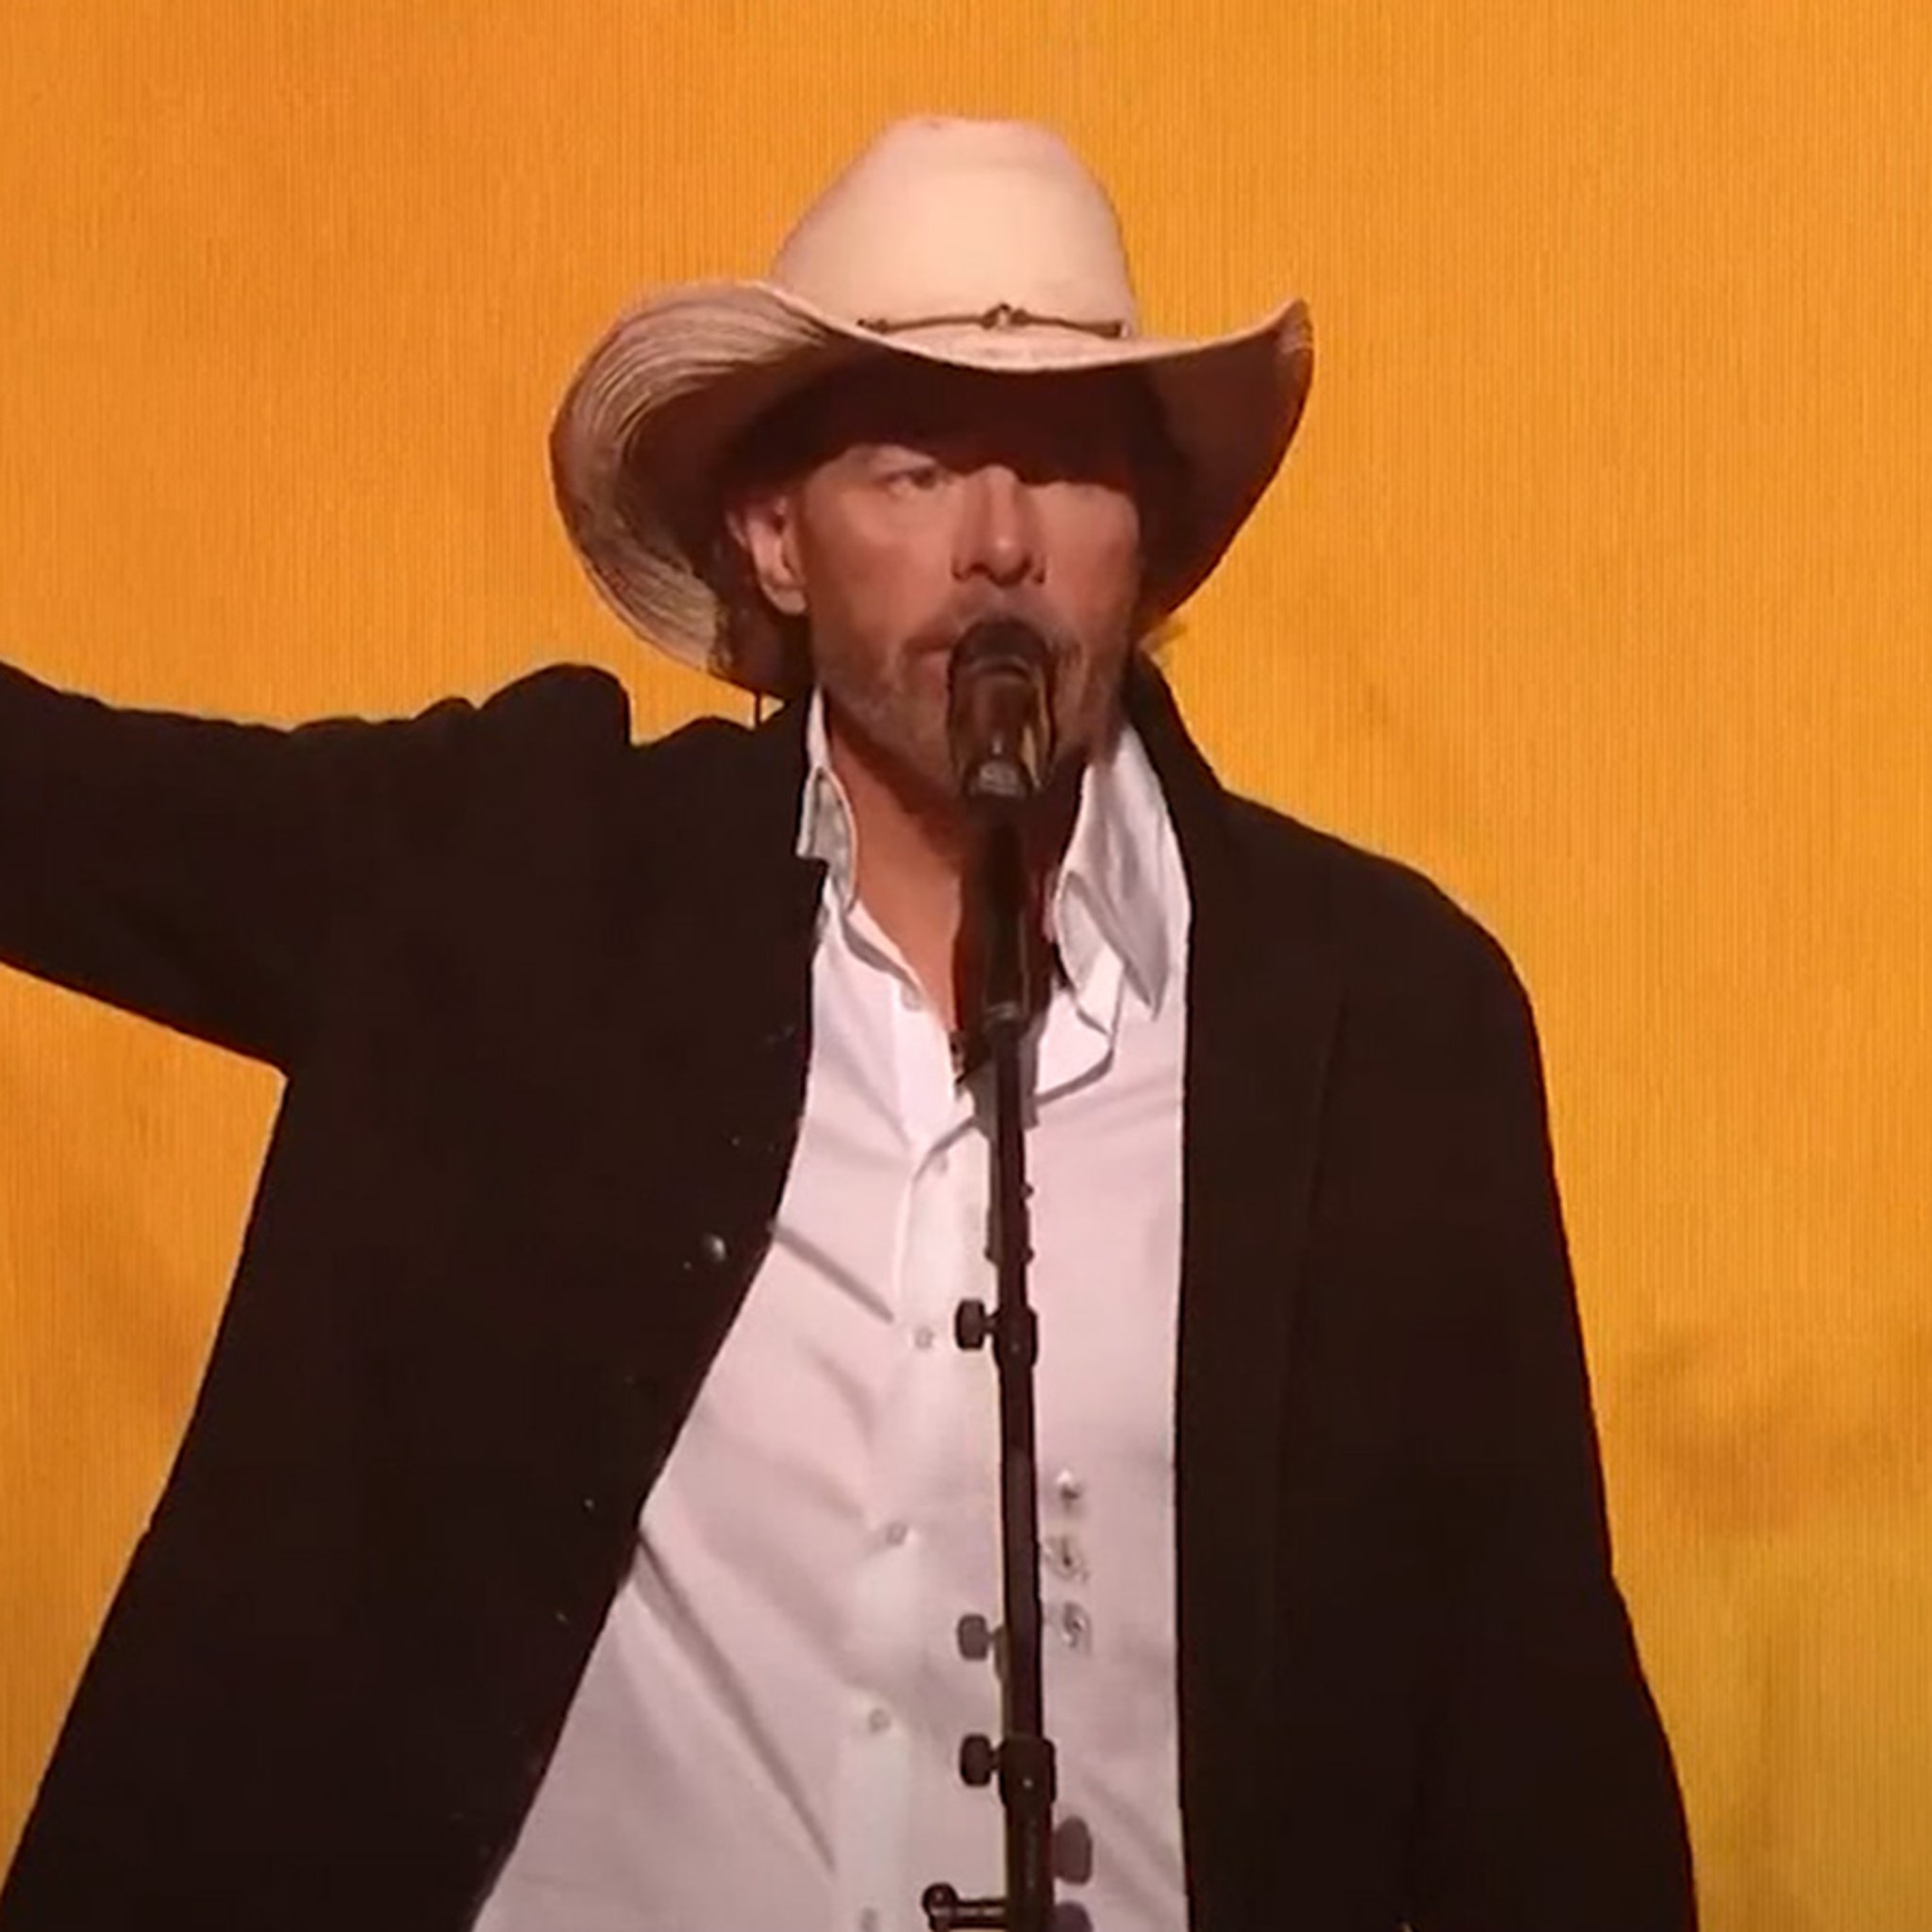 Toby Keith's Performance After Cancer Reveal: His 1st Full Show